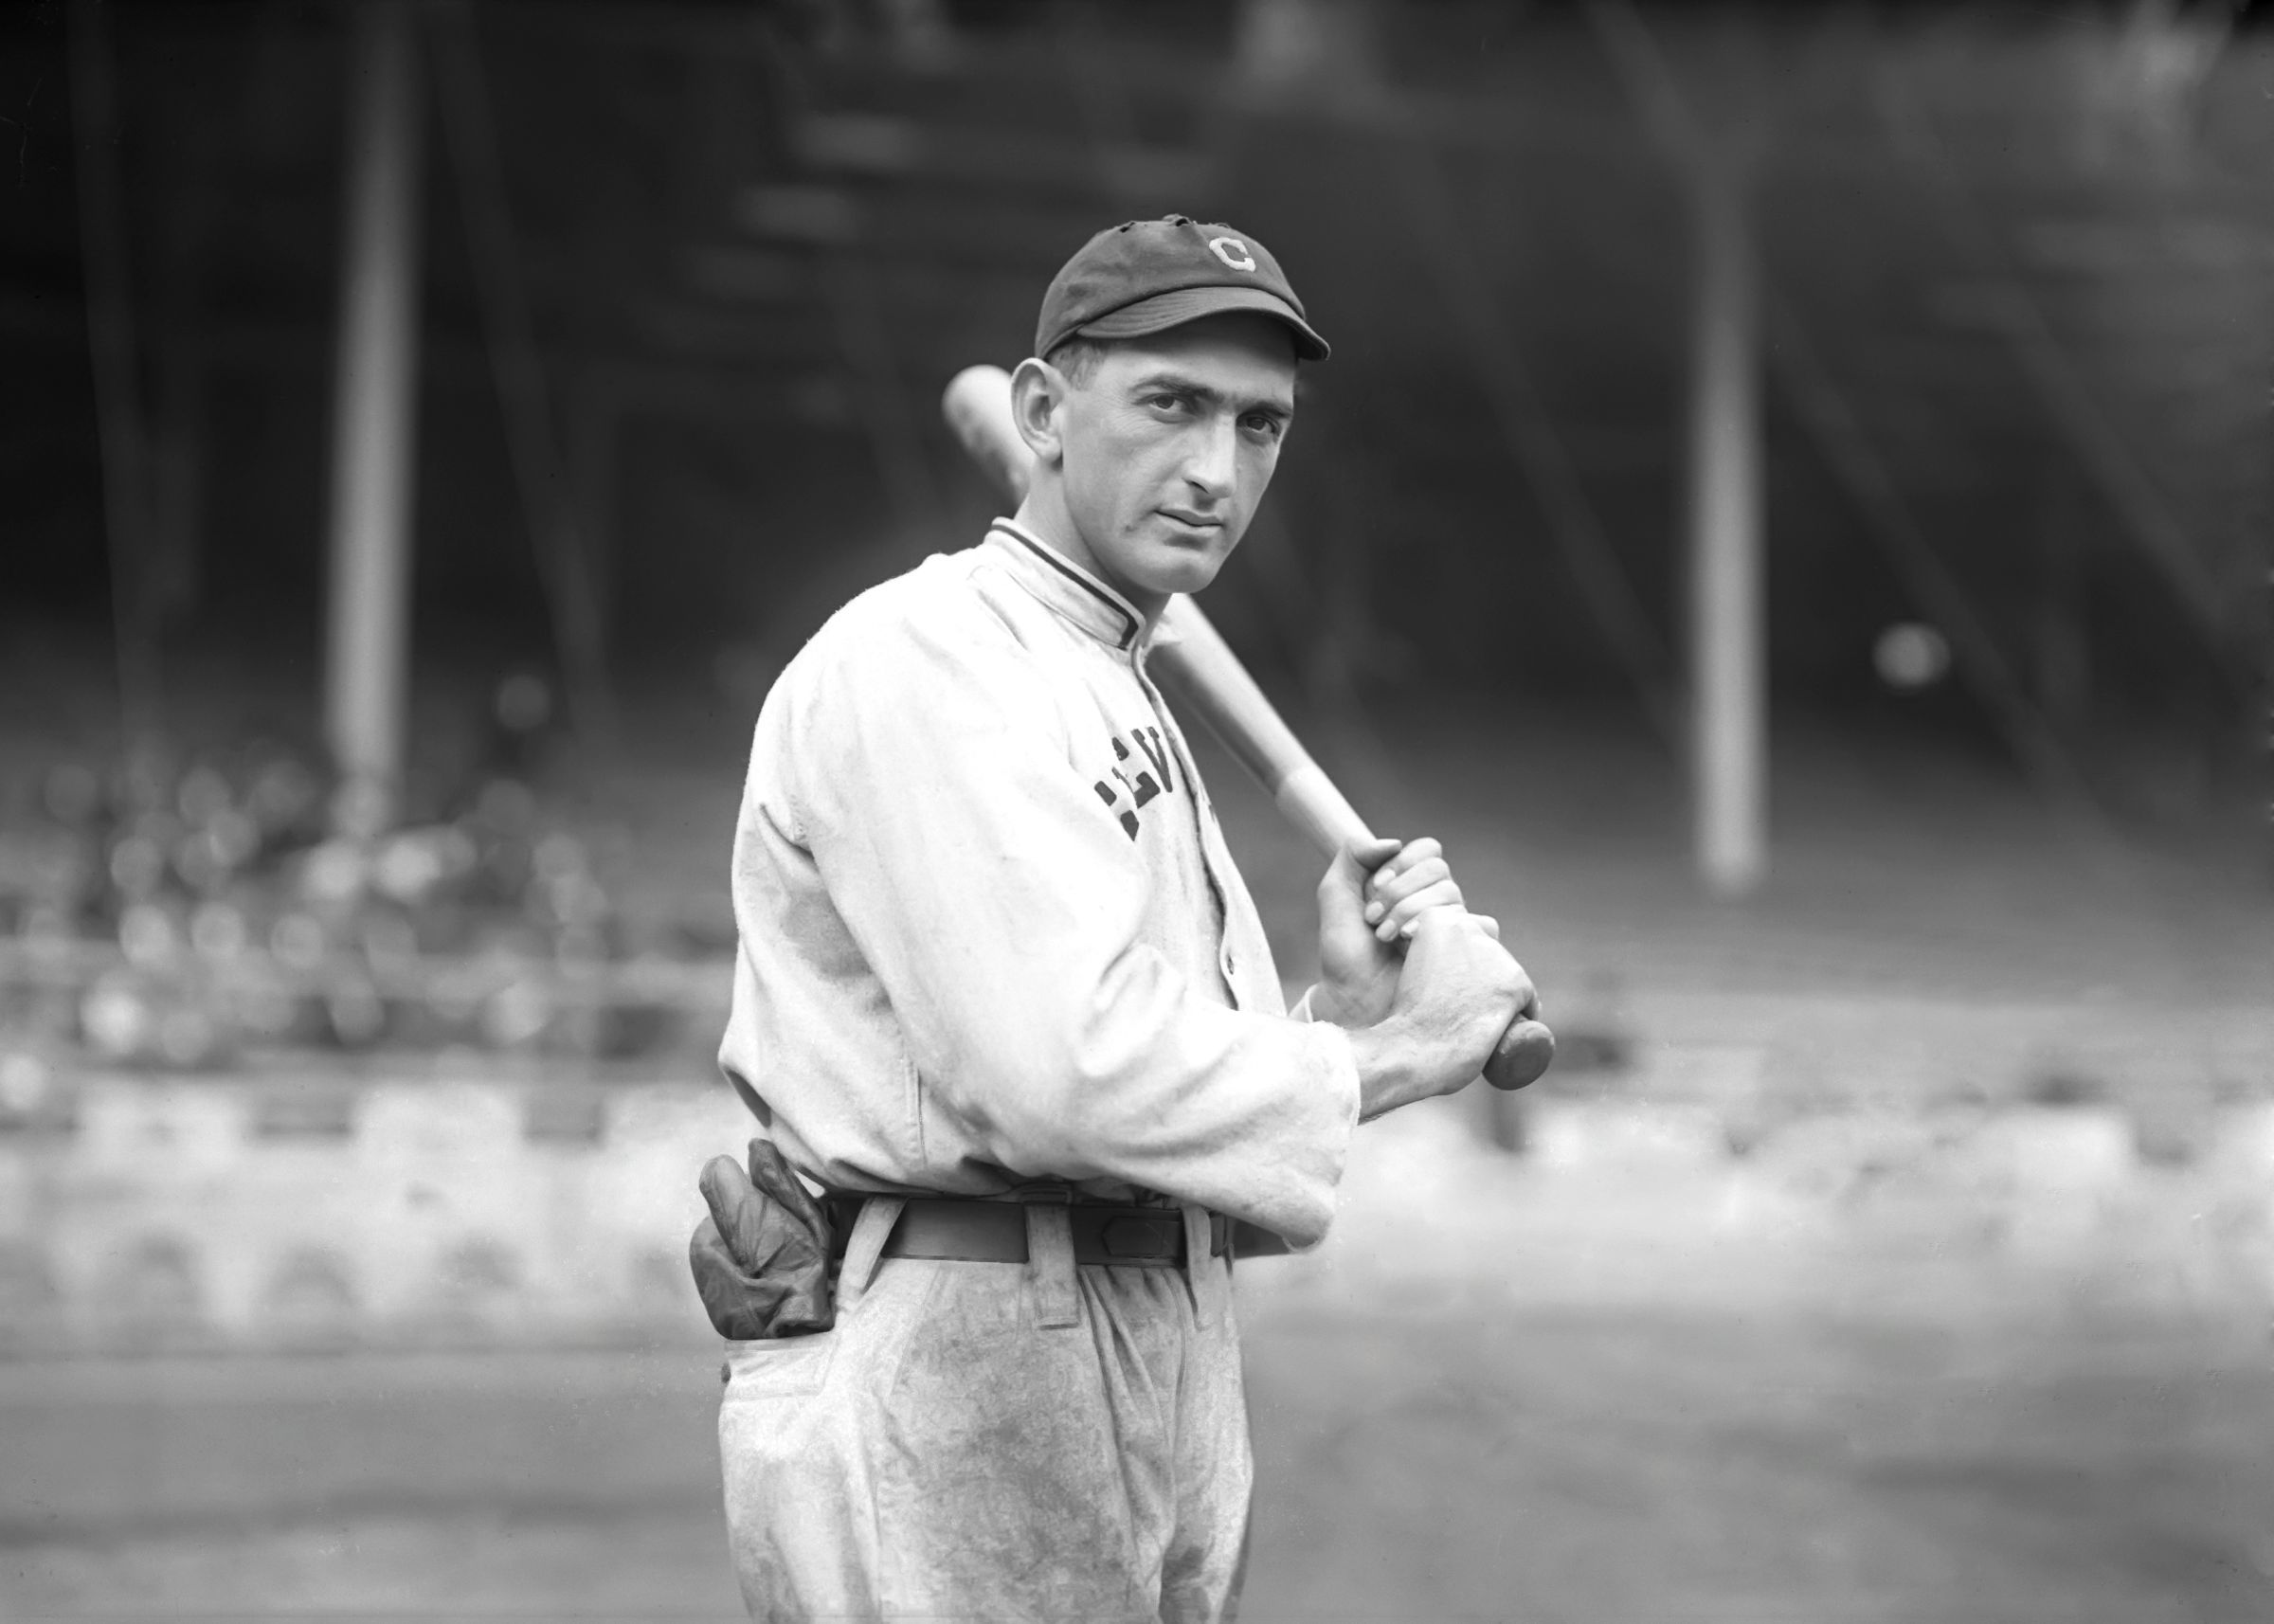 30 Worst Trades in MLB History -- This work is in the public domain in the United States because it was published (or registered with the U.S. Copyright Office) before January 1, 1923.